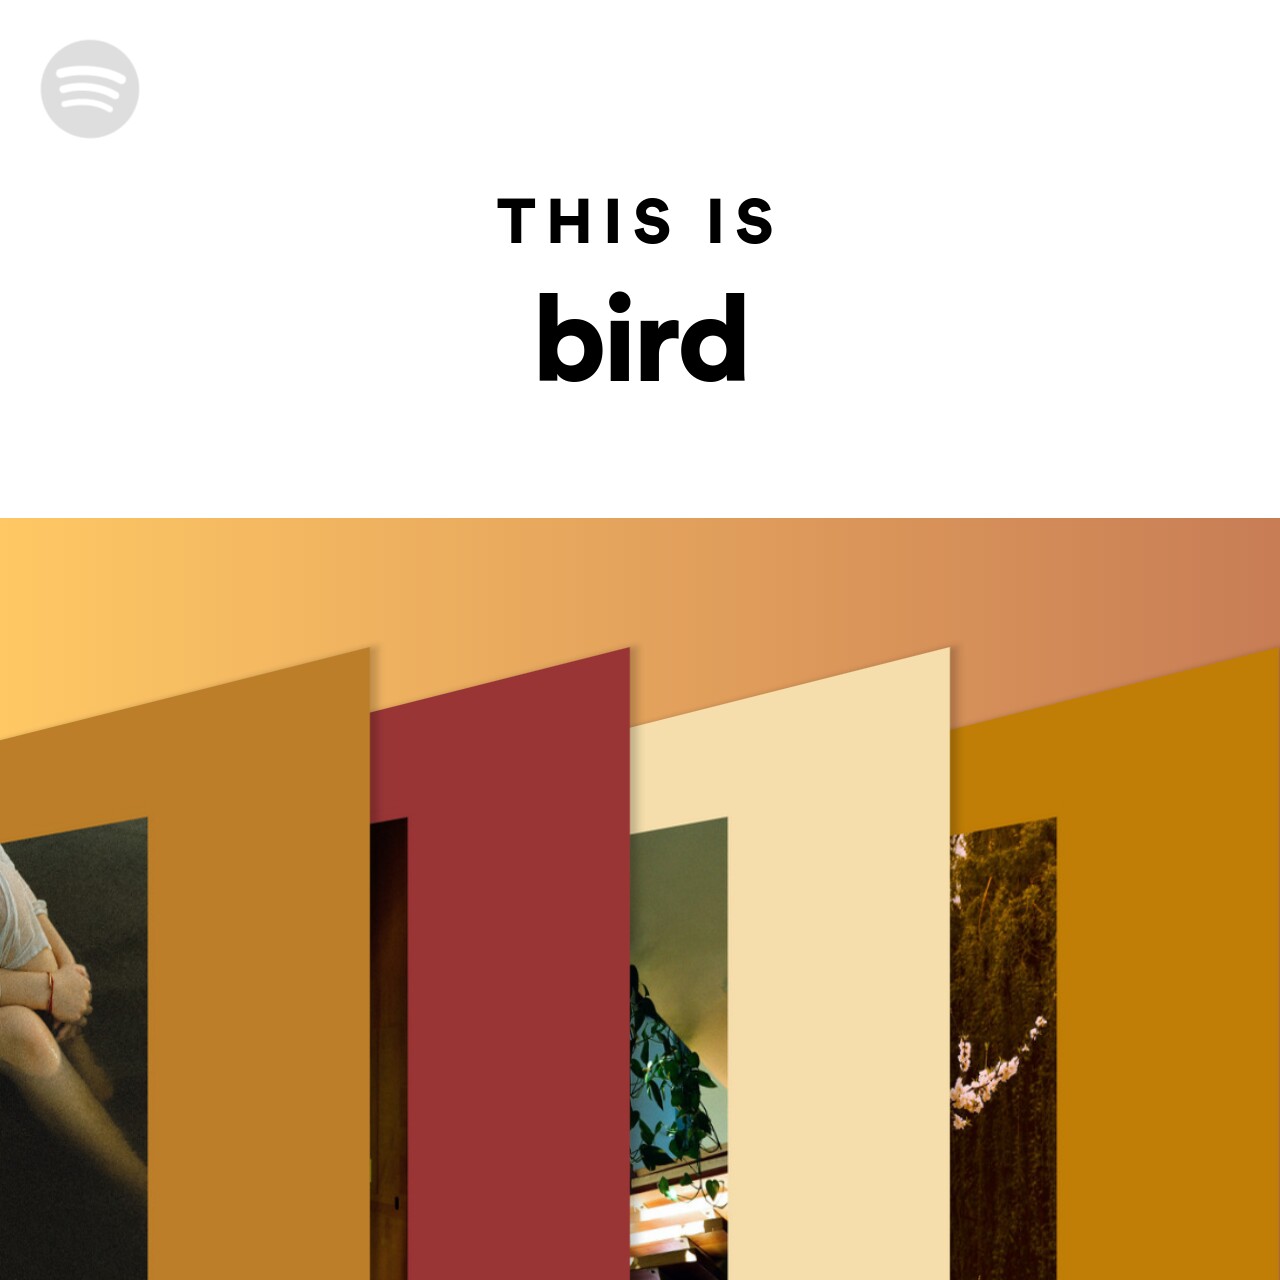 This Is bird